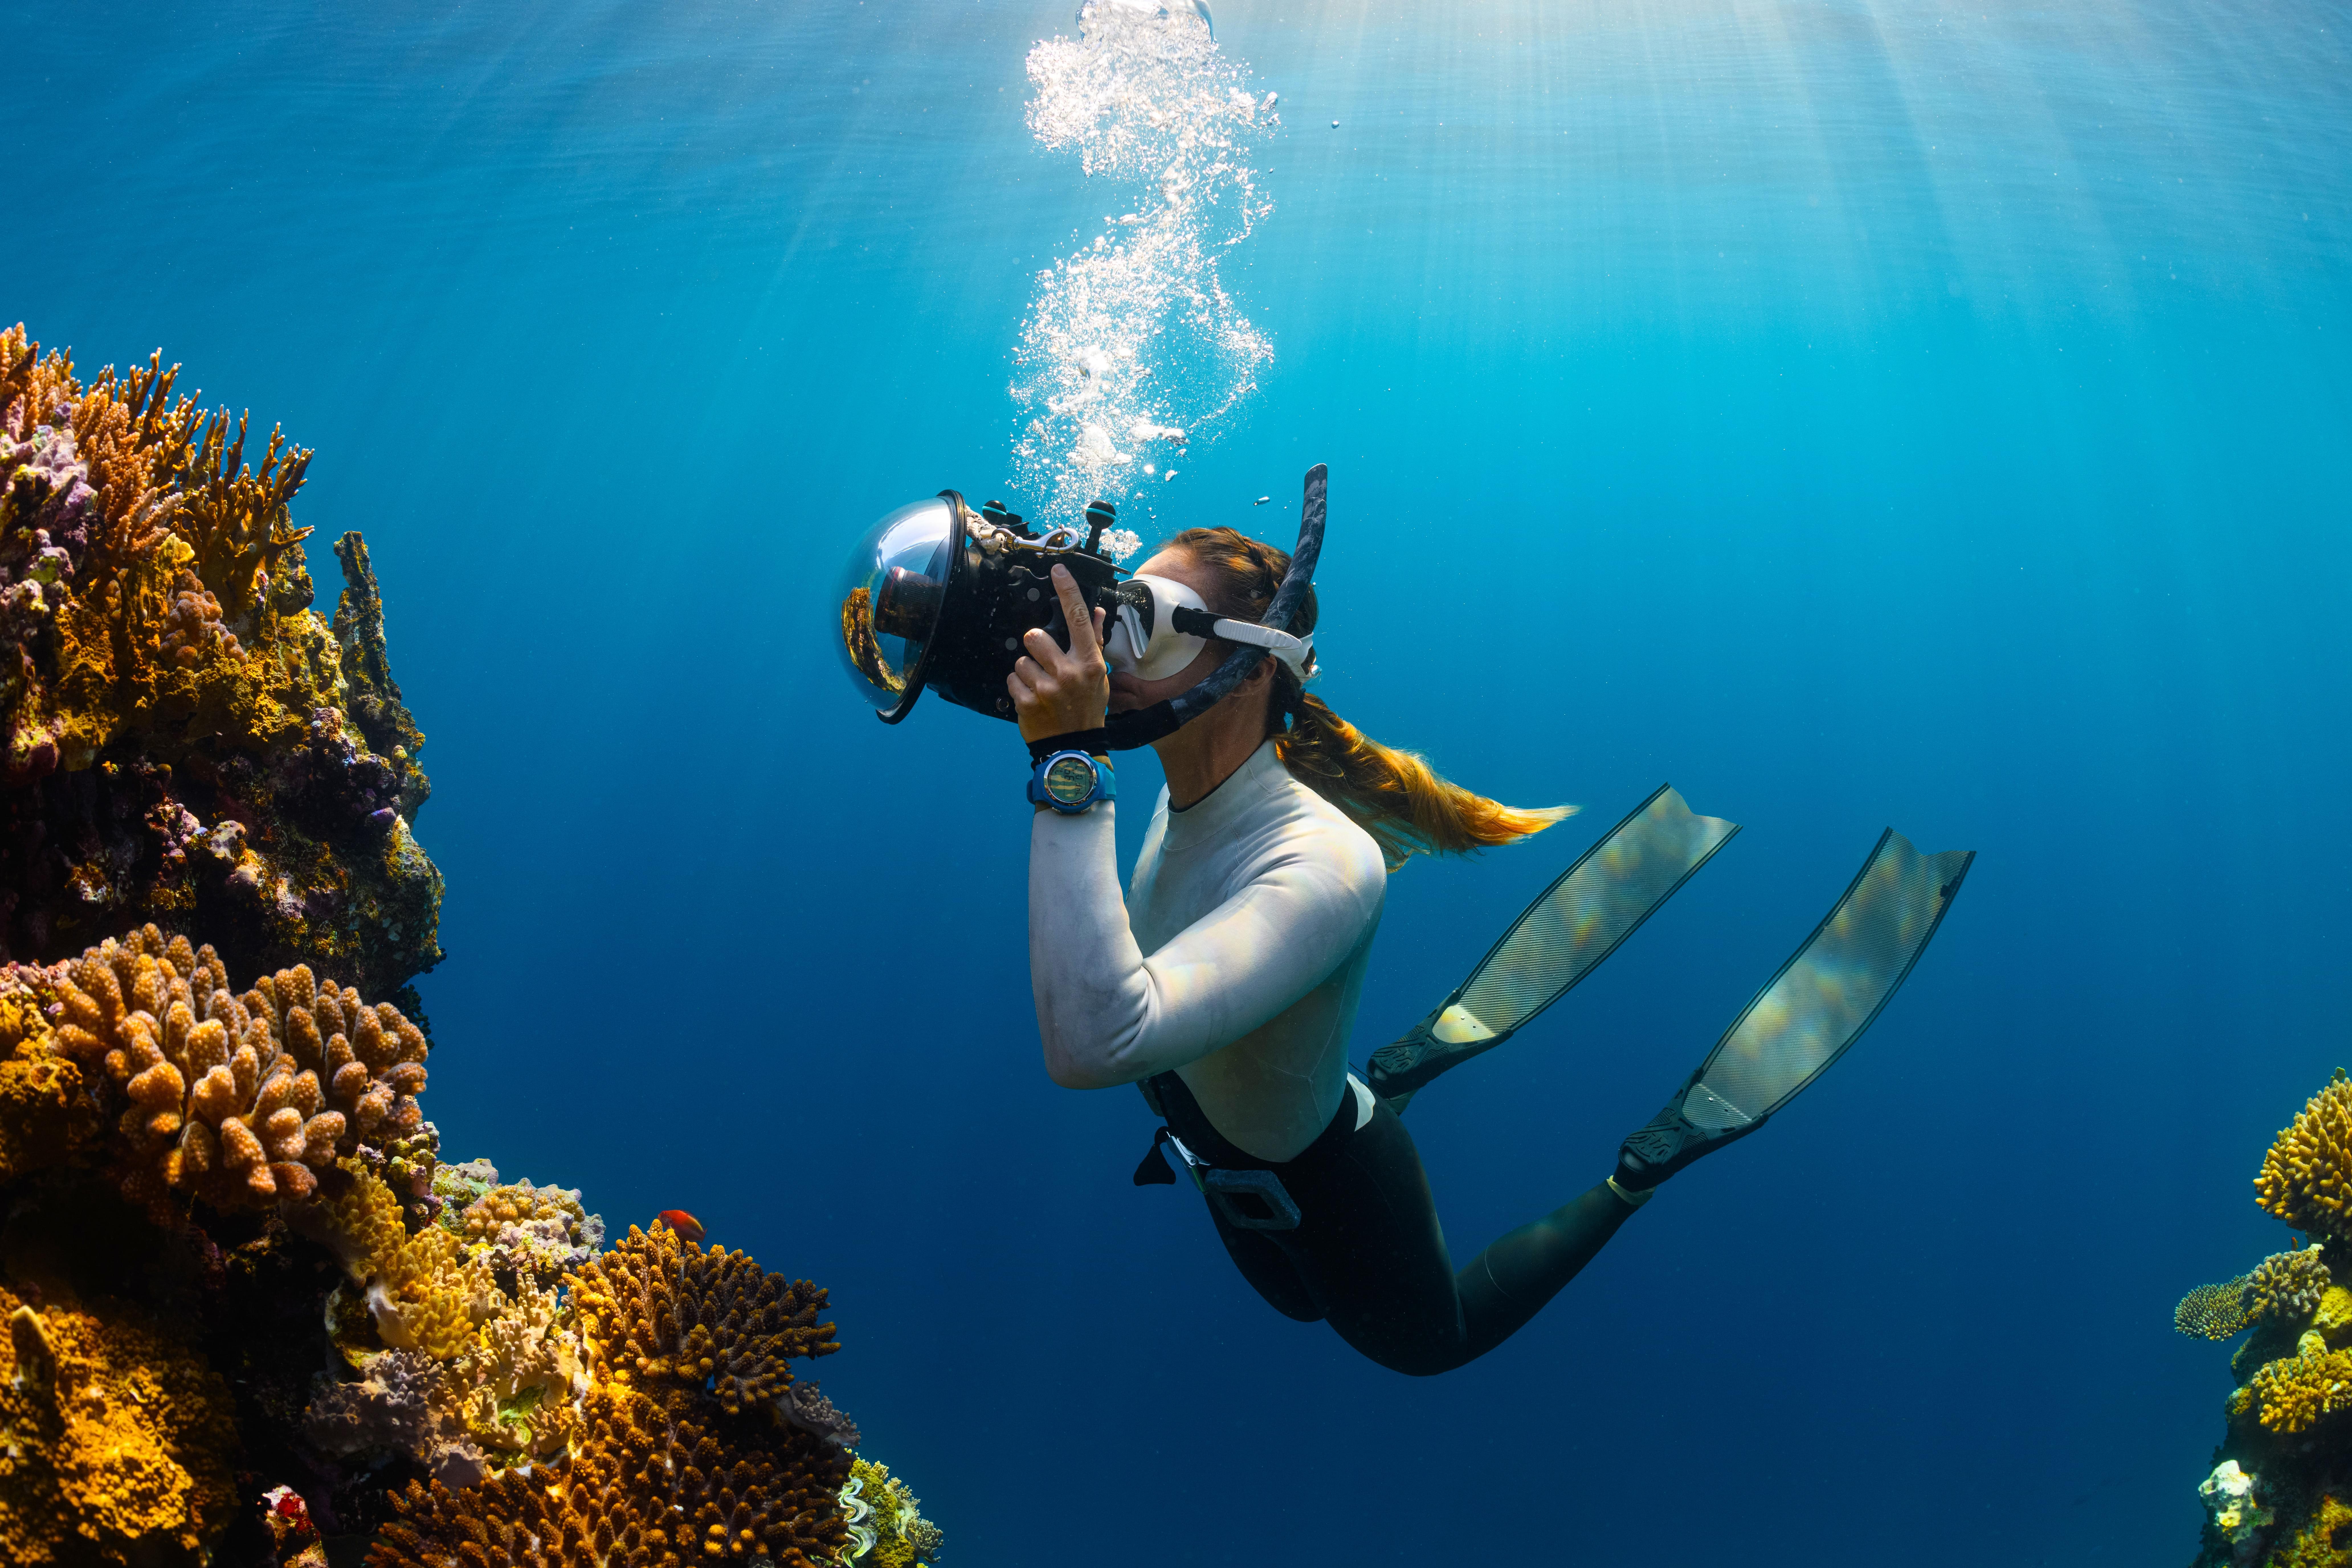 Places to go for Scuba Diving in Dubai